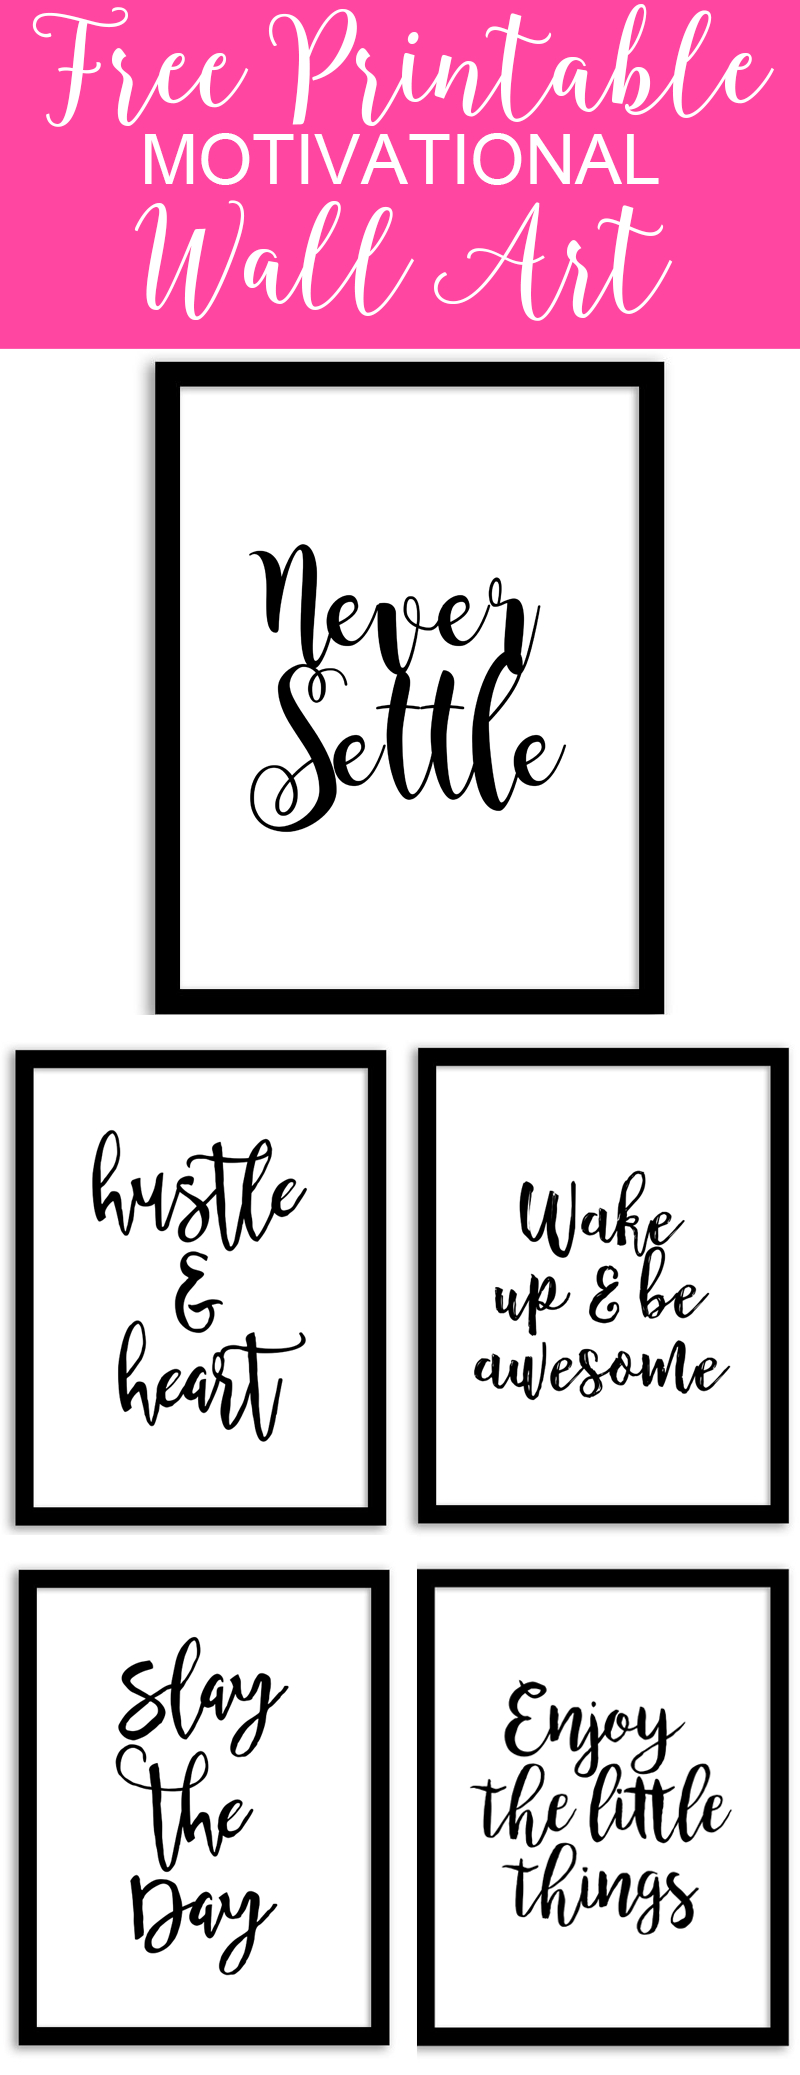 Free Printable Wall Art From @chicfetti - Perfect For Your Office Of - Free Printable Wall Art 8X10